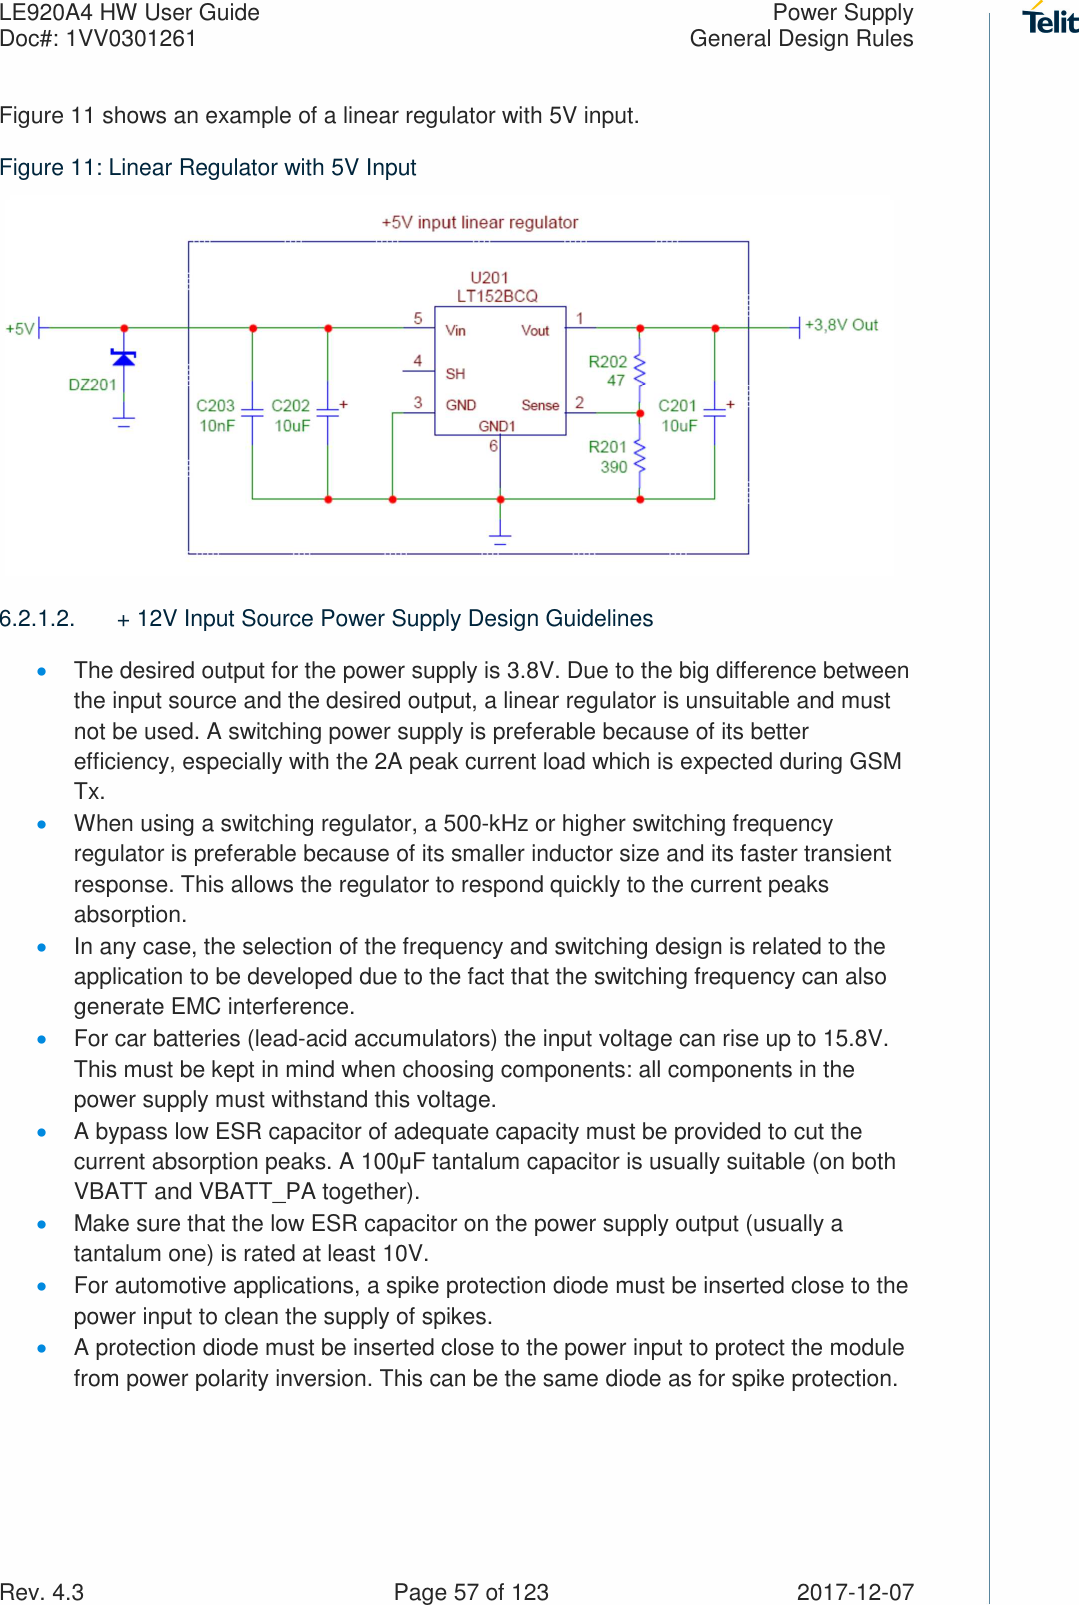 LE920A4 HW User Guide  Power Supply Doc#: 1VV0301261  General Design Rules Rev. 4.3    Page 57 of 123  2017-12-07 Figure 11 shows an example of a linear regulator with 5V input. Figure 11: Linear Regulator with 5V Input    6.2.1.2.  + 12V Input Source Power Supply Design Guidelines • The desired output for the power supply is 3.8V. Due to the big difference between the input source and the desired output, a linear regulator is unsuitable and must not be used. A switching power supply is preferable because of its better efficiency, especially with the 2A peak current load which is expected during GSM Tx.  • When using a switching regulator, a 500-kHz or higher switching frequency regulator is preferable because of its smaller inductor size and its faster transient response. This allows the regulator to respond quickly to the current peaks absorption.  • In any case, the selection of the frequency and switching design is related to the application to be developed due to the fact that the switching frequency can also generate EMC interference. • For car batteries (lead-acid accumulators) the input voltage can rise up to 15.8V. This must be kept in mind when choosing components: all components in the power supply must withstand this voltage. • A bypass low ESR capacitor of adequate capacity must be provided to cut the current absorption peaks. A 100μF tantalum capacitor is usually suitable (on both VBATT and VBATT_PA together). • Make sure that the low ESR capacitor on the power supply output (usually a tantalum one) is rated at least 10V. • For automotive applications, a spike protection diode must be inserted close to the power input to clean the supply of spikes.  • A protection diode must be inserted close to the power input to protect the module from power polarity inversion. This can be the same diode as for spike protection. 